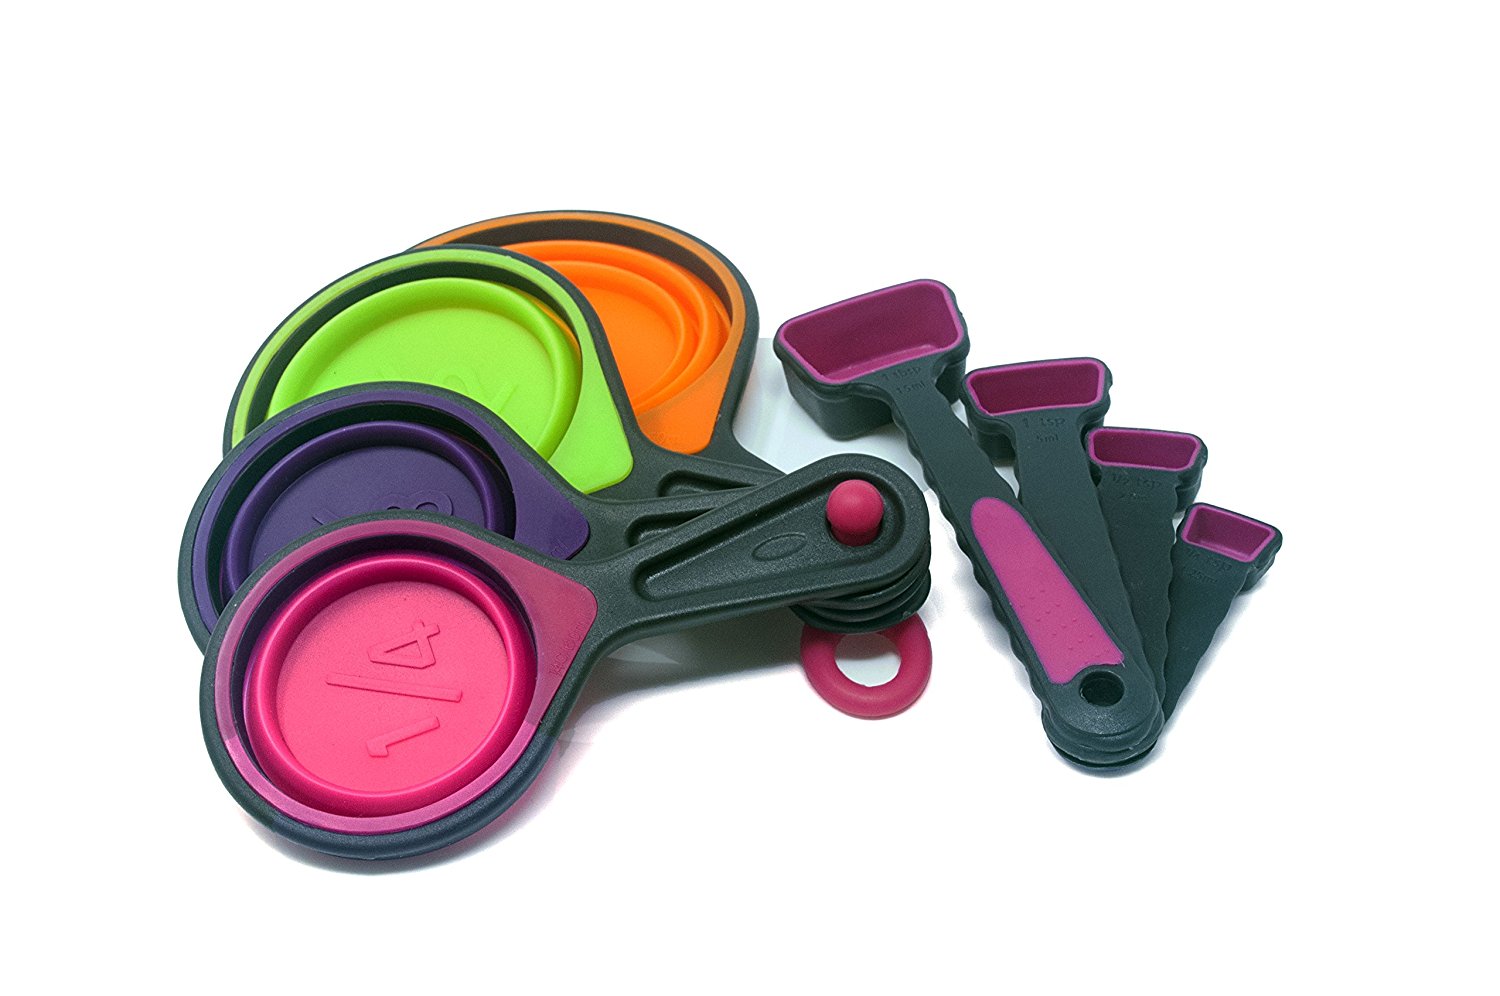 Collapsible Measuring Cups and Spoons